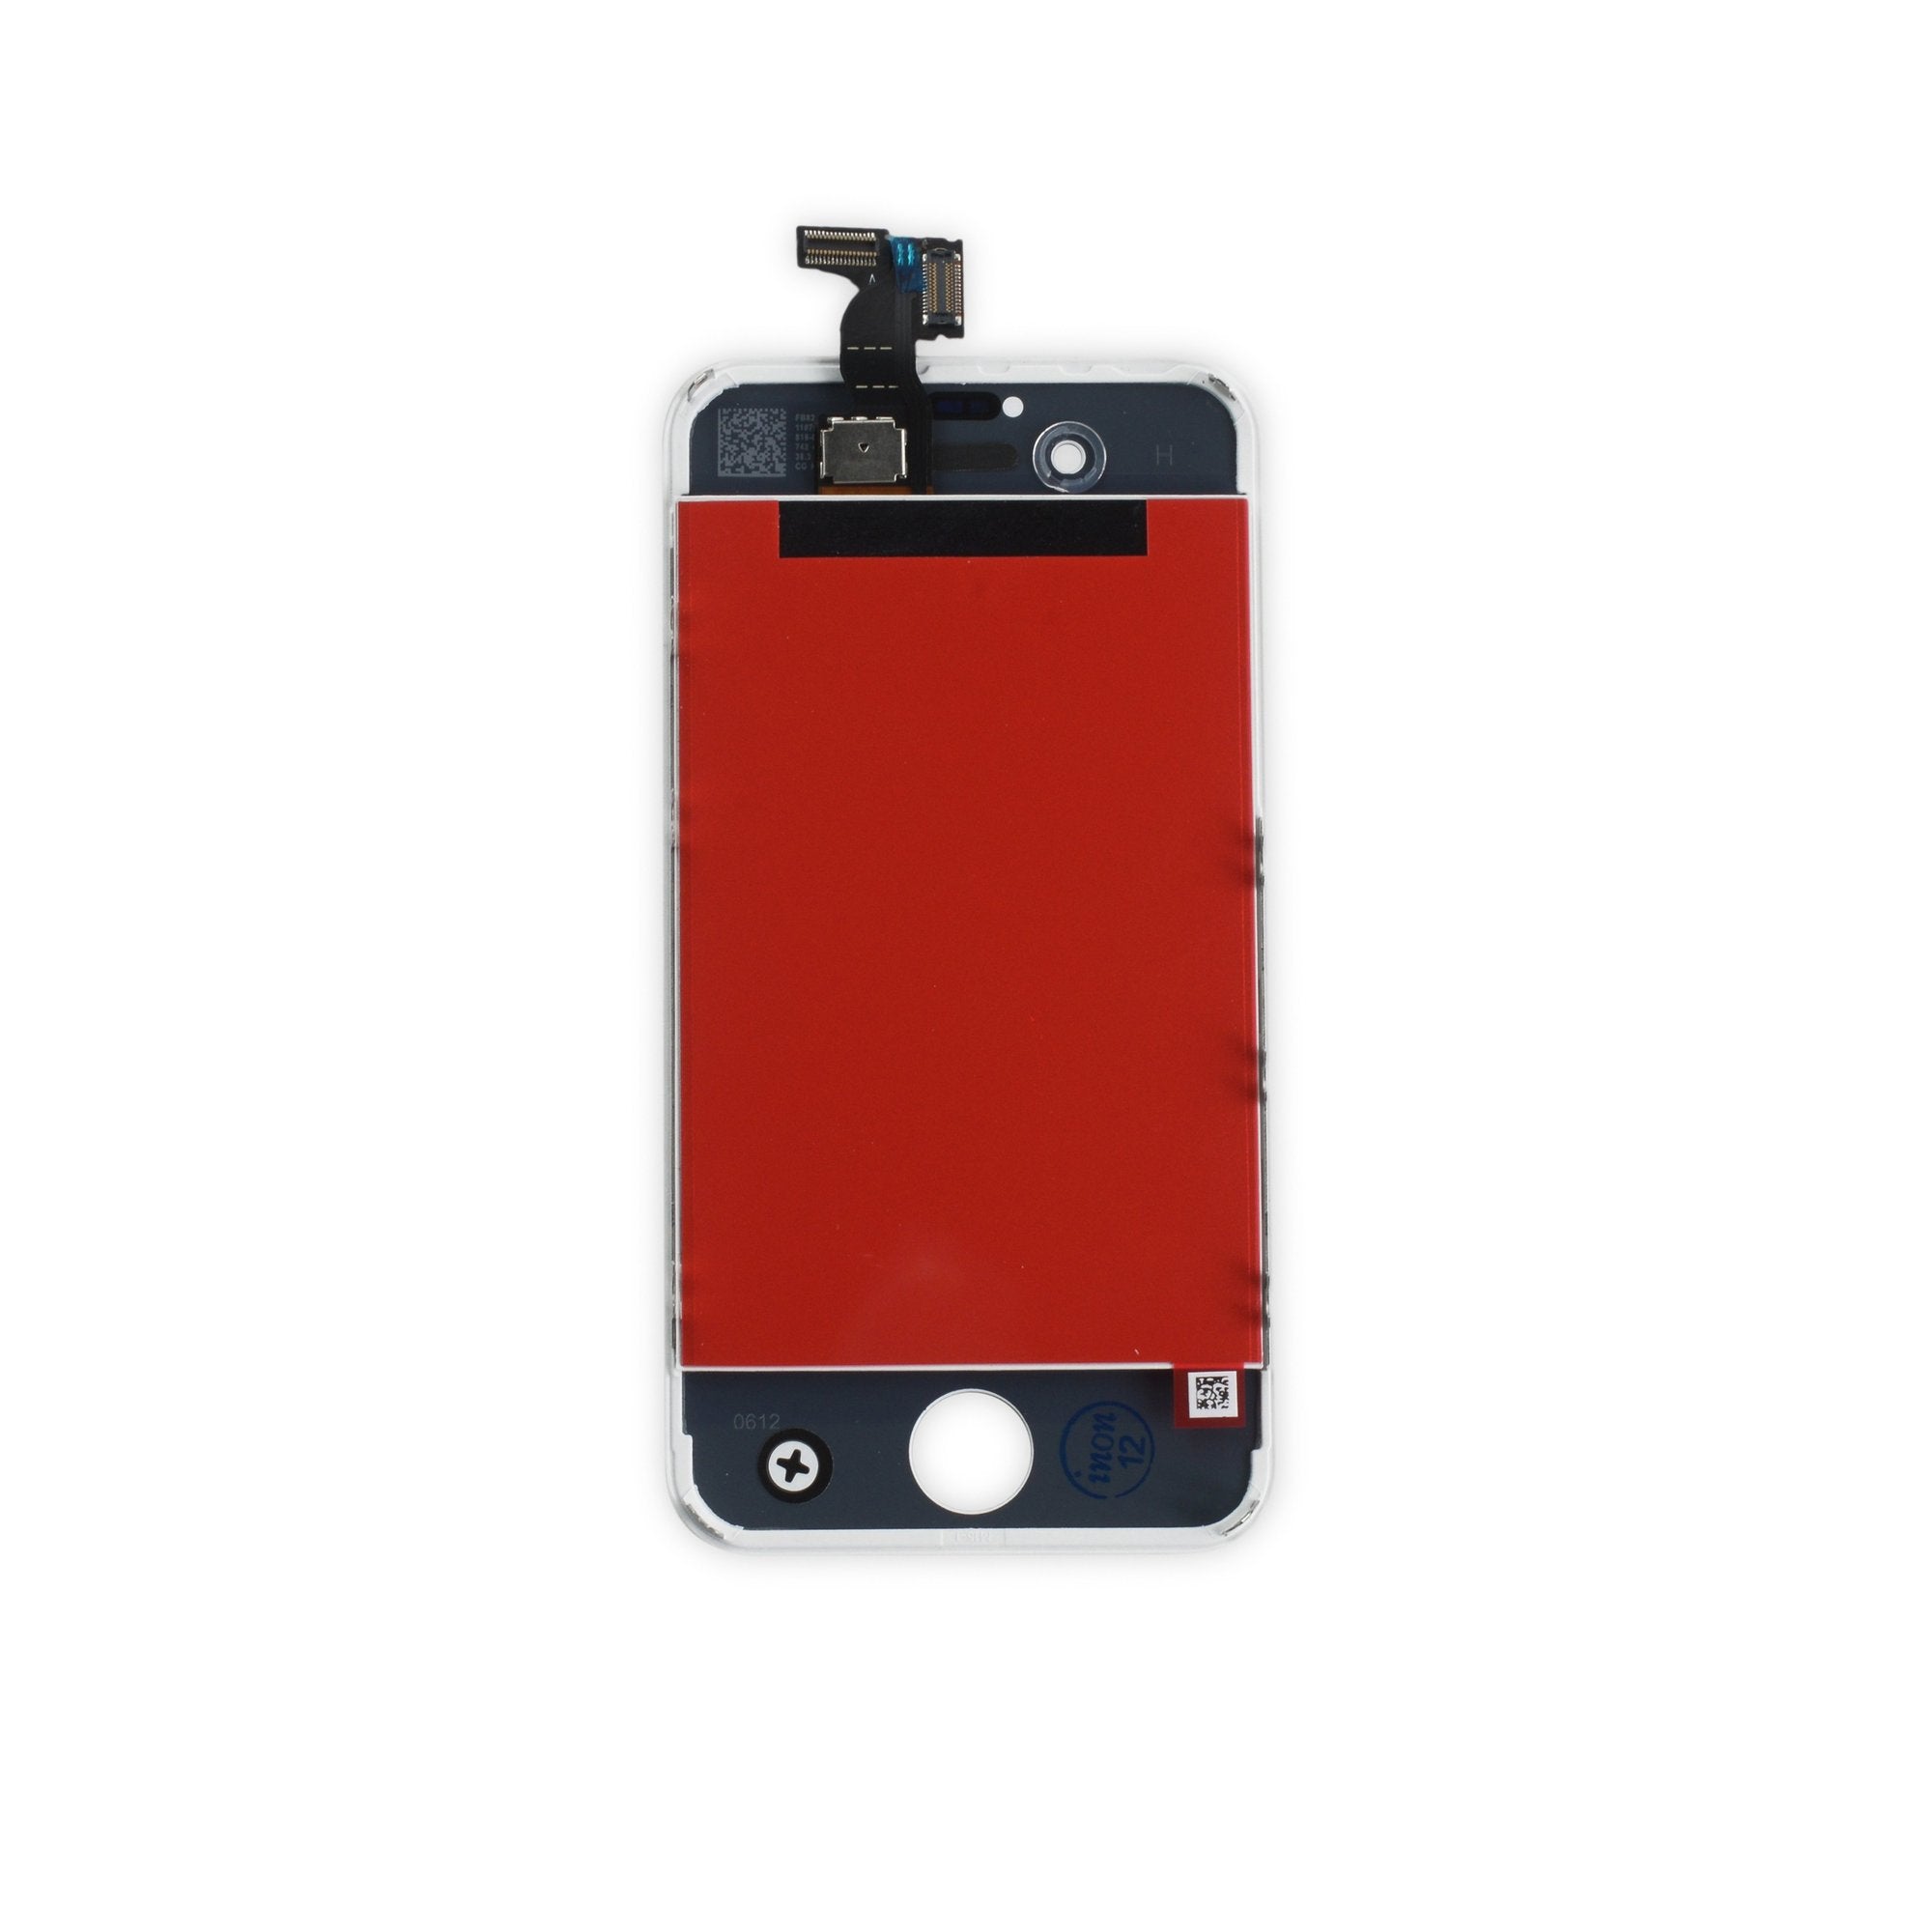 Screen for iPhone 4 4S LCD Screen LCD Display For iPhone 4S Touch Screen  Digitizer Screen Assembly Phone Replacement Tested Work